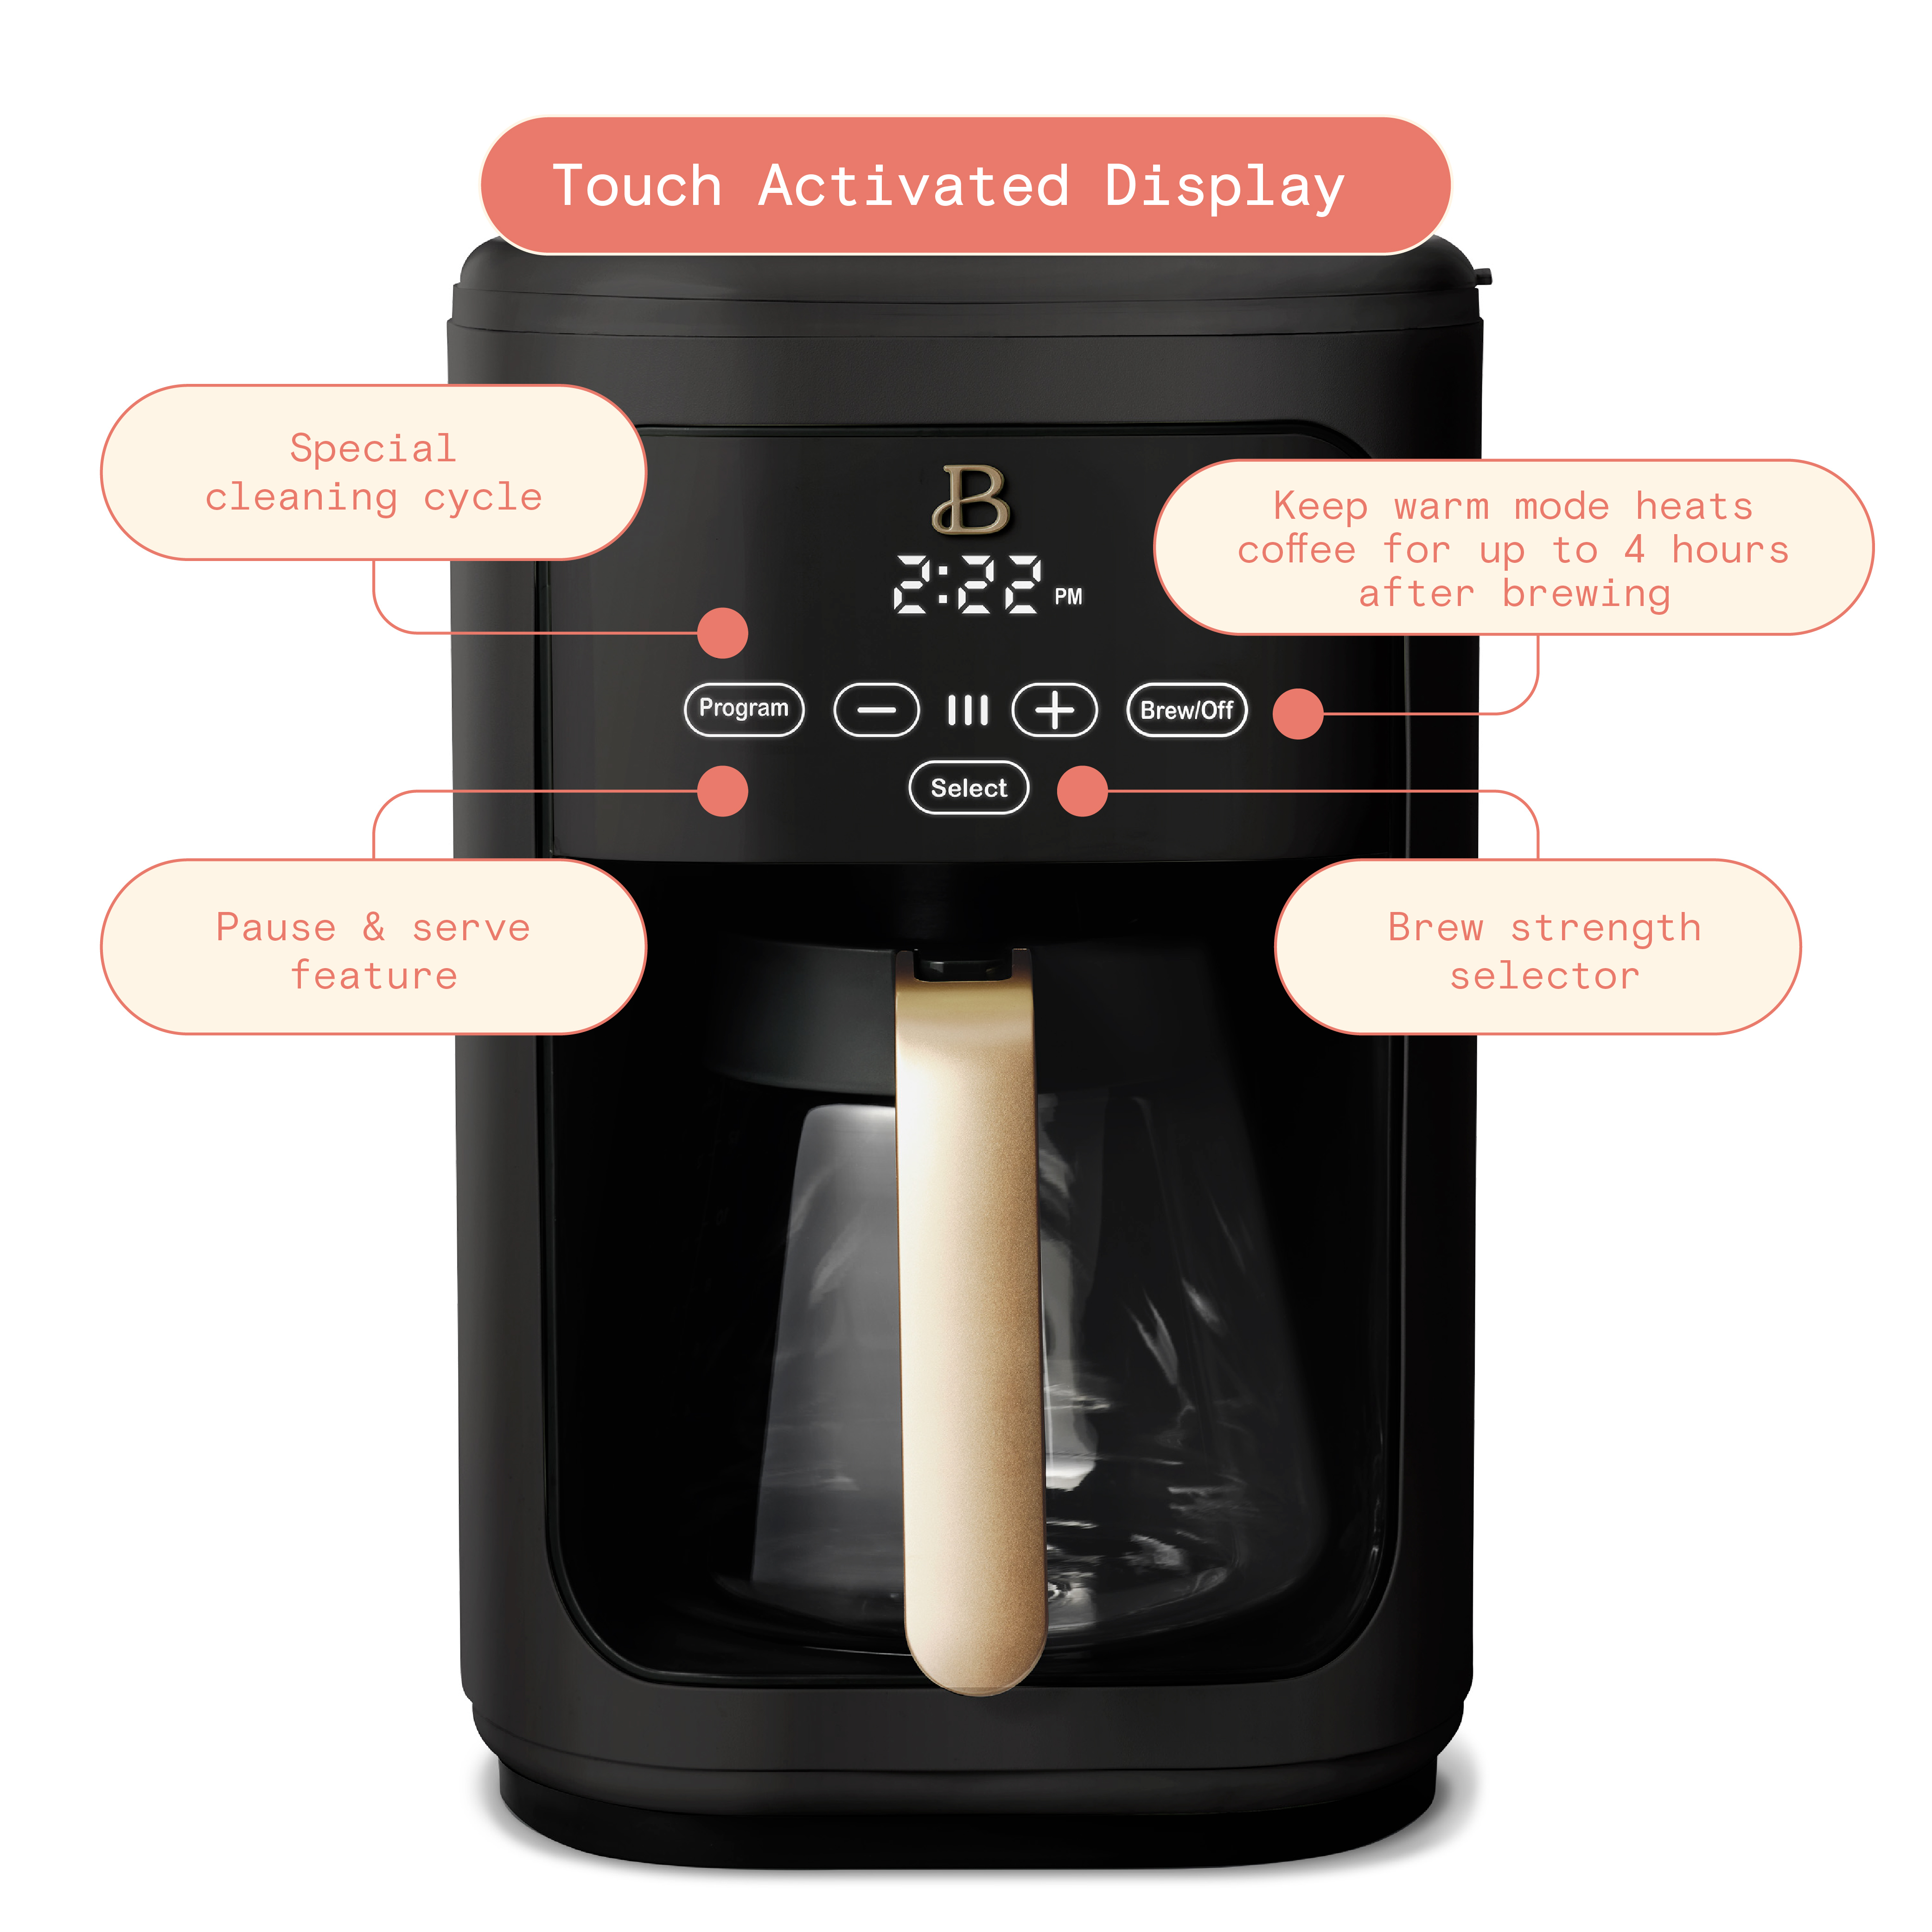 Beautiful 14-Cup Programmable Drip Coffee Maker with Touch-Activated Display, Black Sesame by Drew Barrymore - image 4 of 10